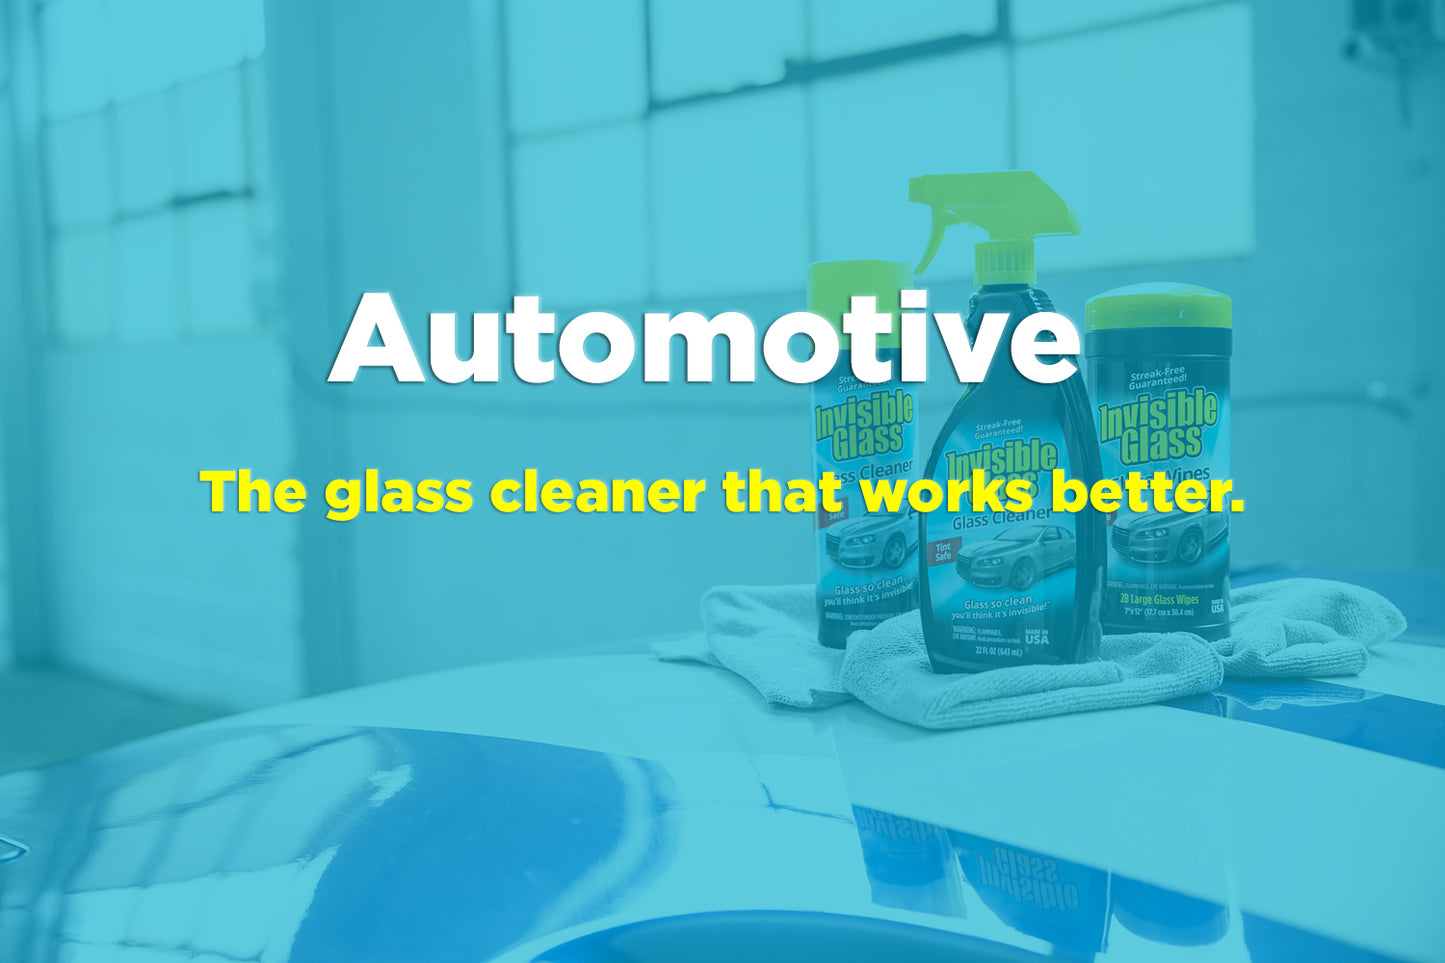 Invisible Glass Wipes – Stoner Car Care